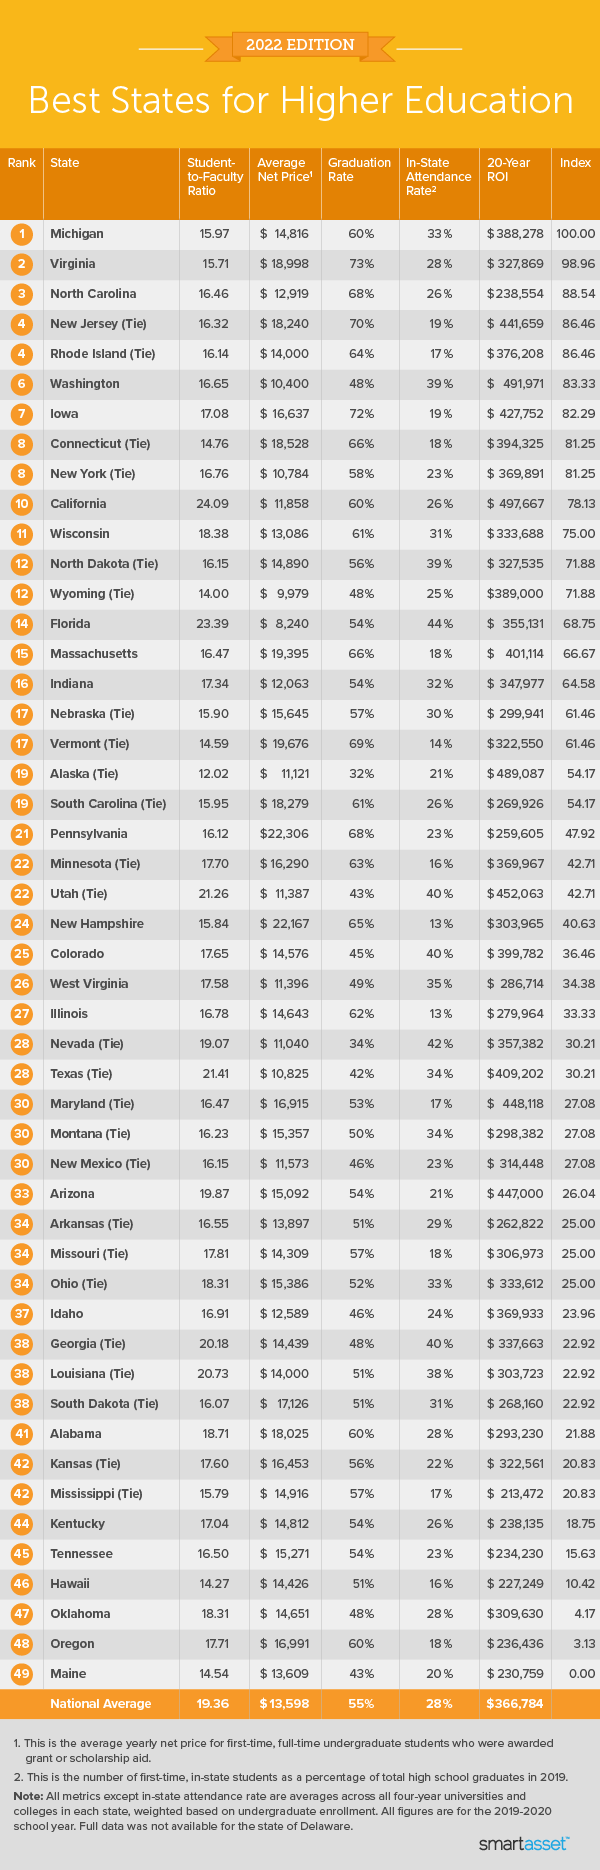 Image is a table by SmartAsset titled "Best States for Higher Education."